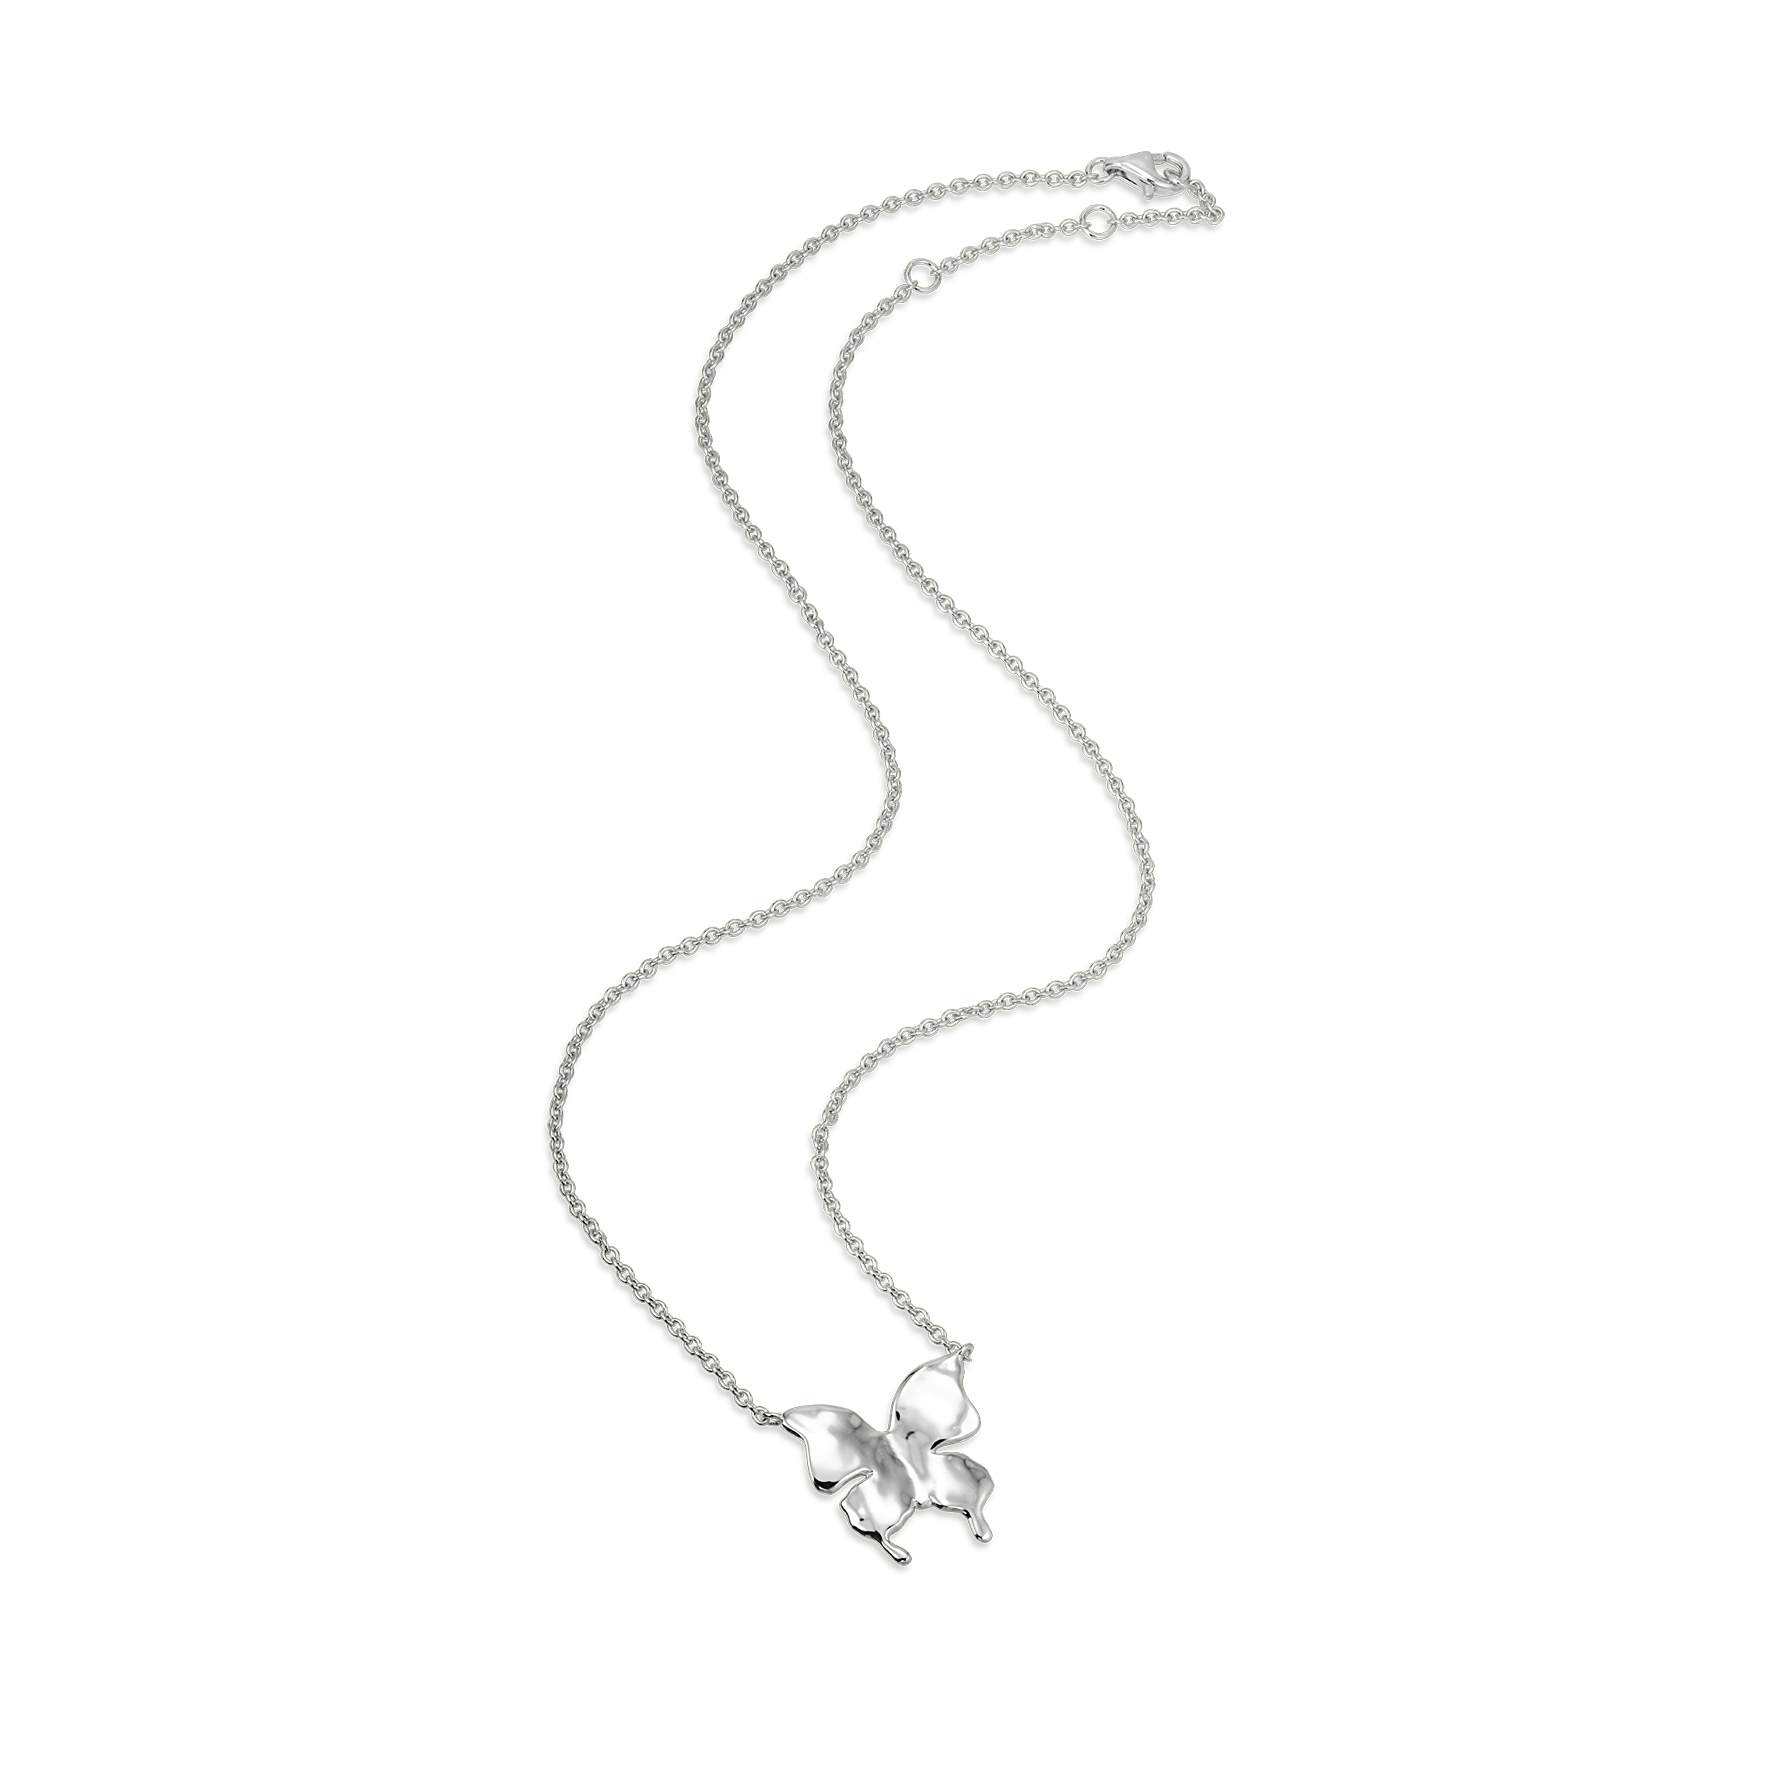 Butterfly Necklace from Jane Kønig in Silver Sterling 925